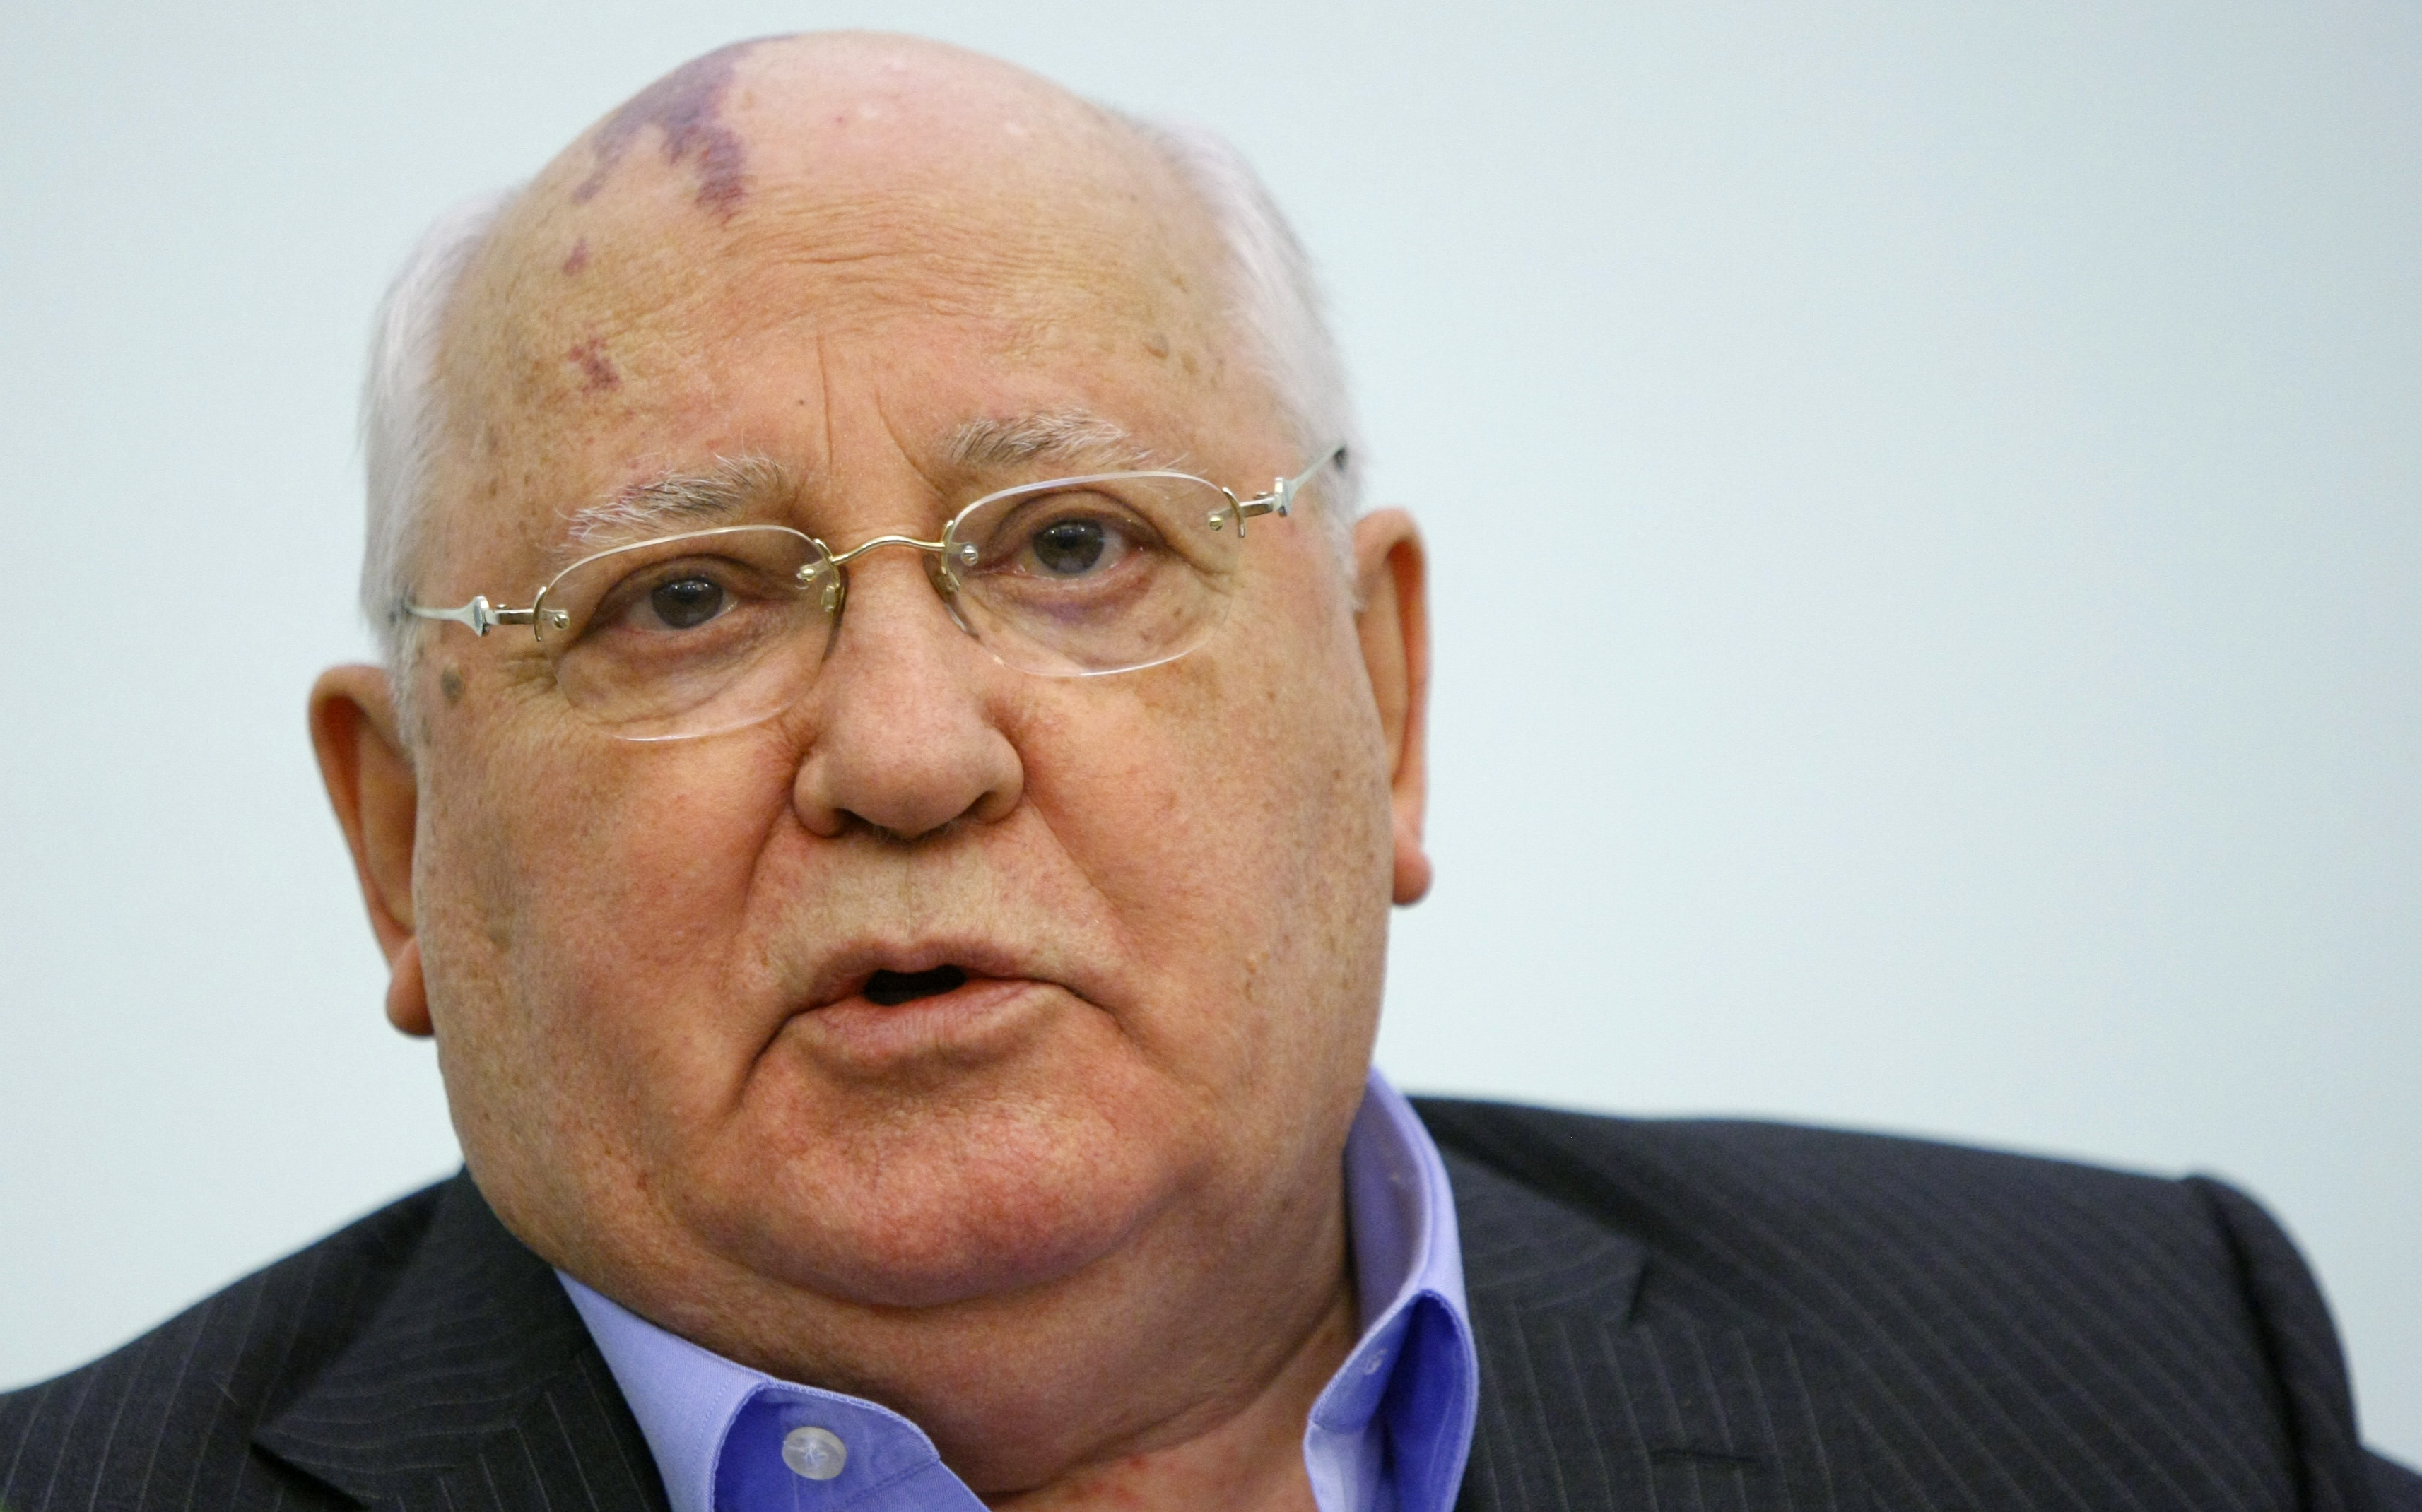 Mikhail Gorbachev Warns Ukraine Crisis Could Turn Into Hot War With Russia Cbs News 